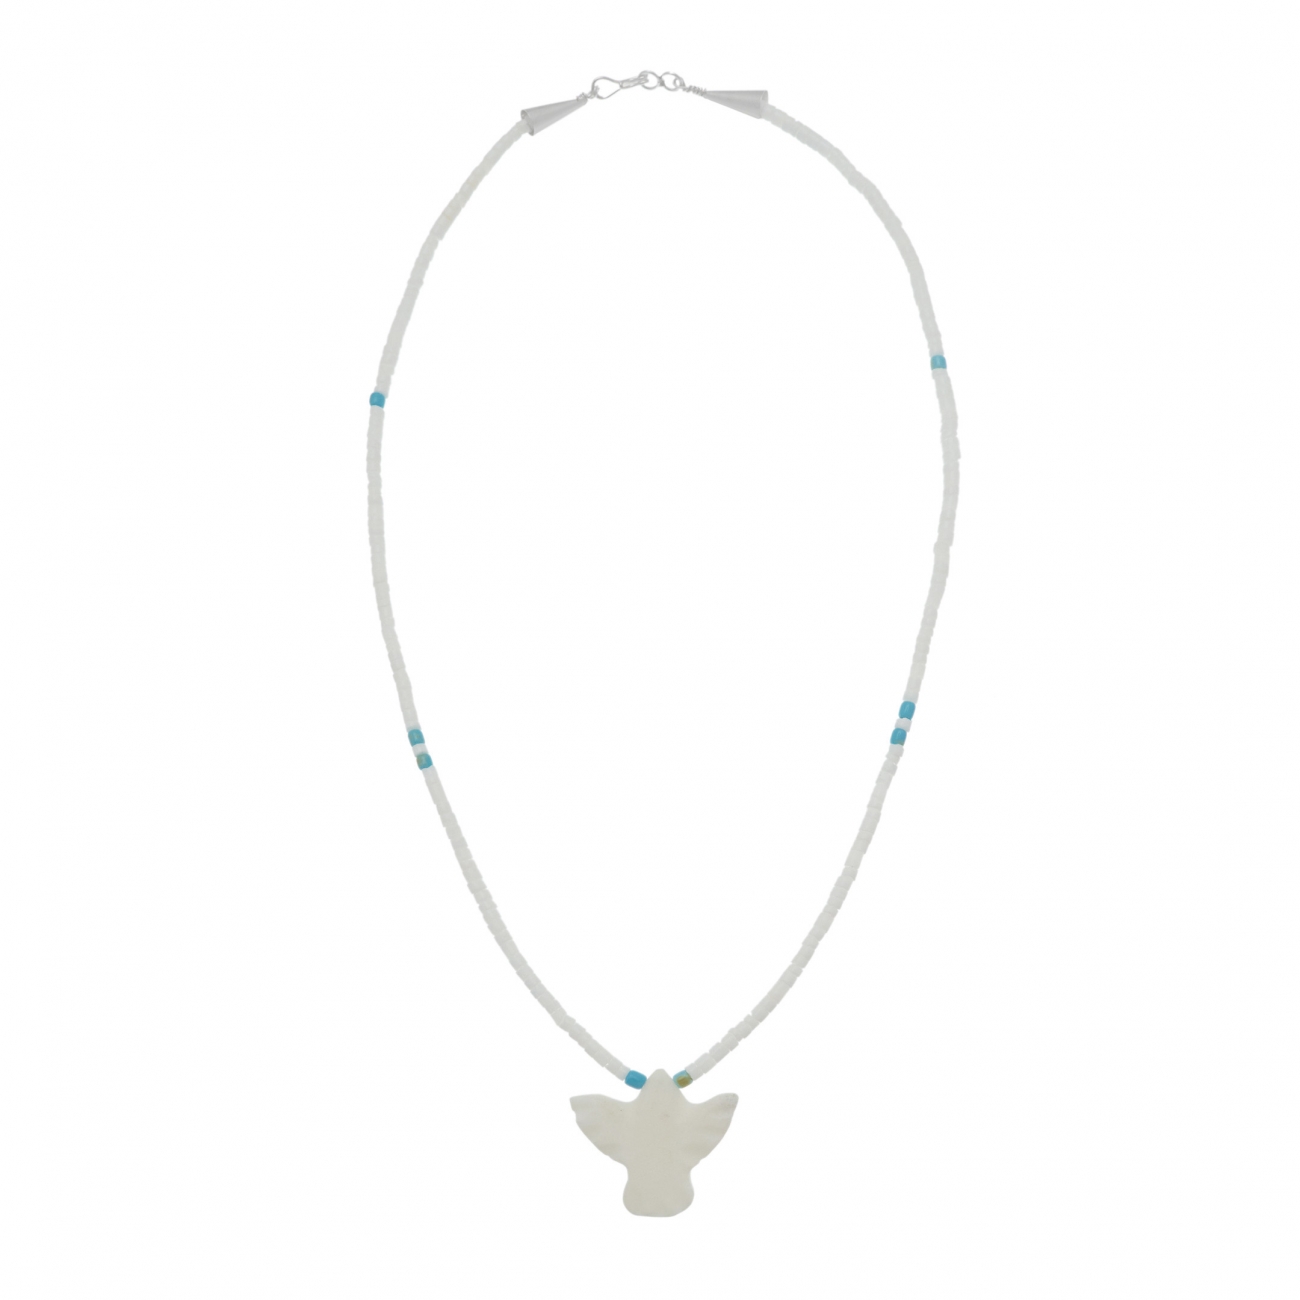 Eagle necklace COw45 in shell and turquoise - Harpo Paris